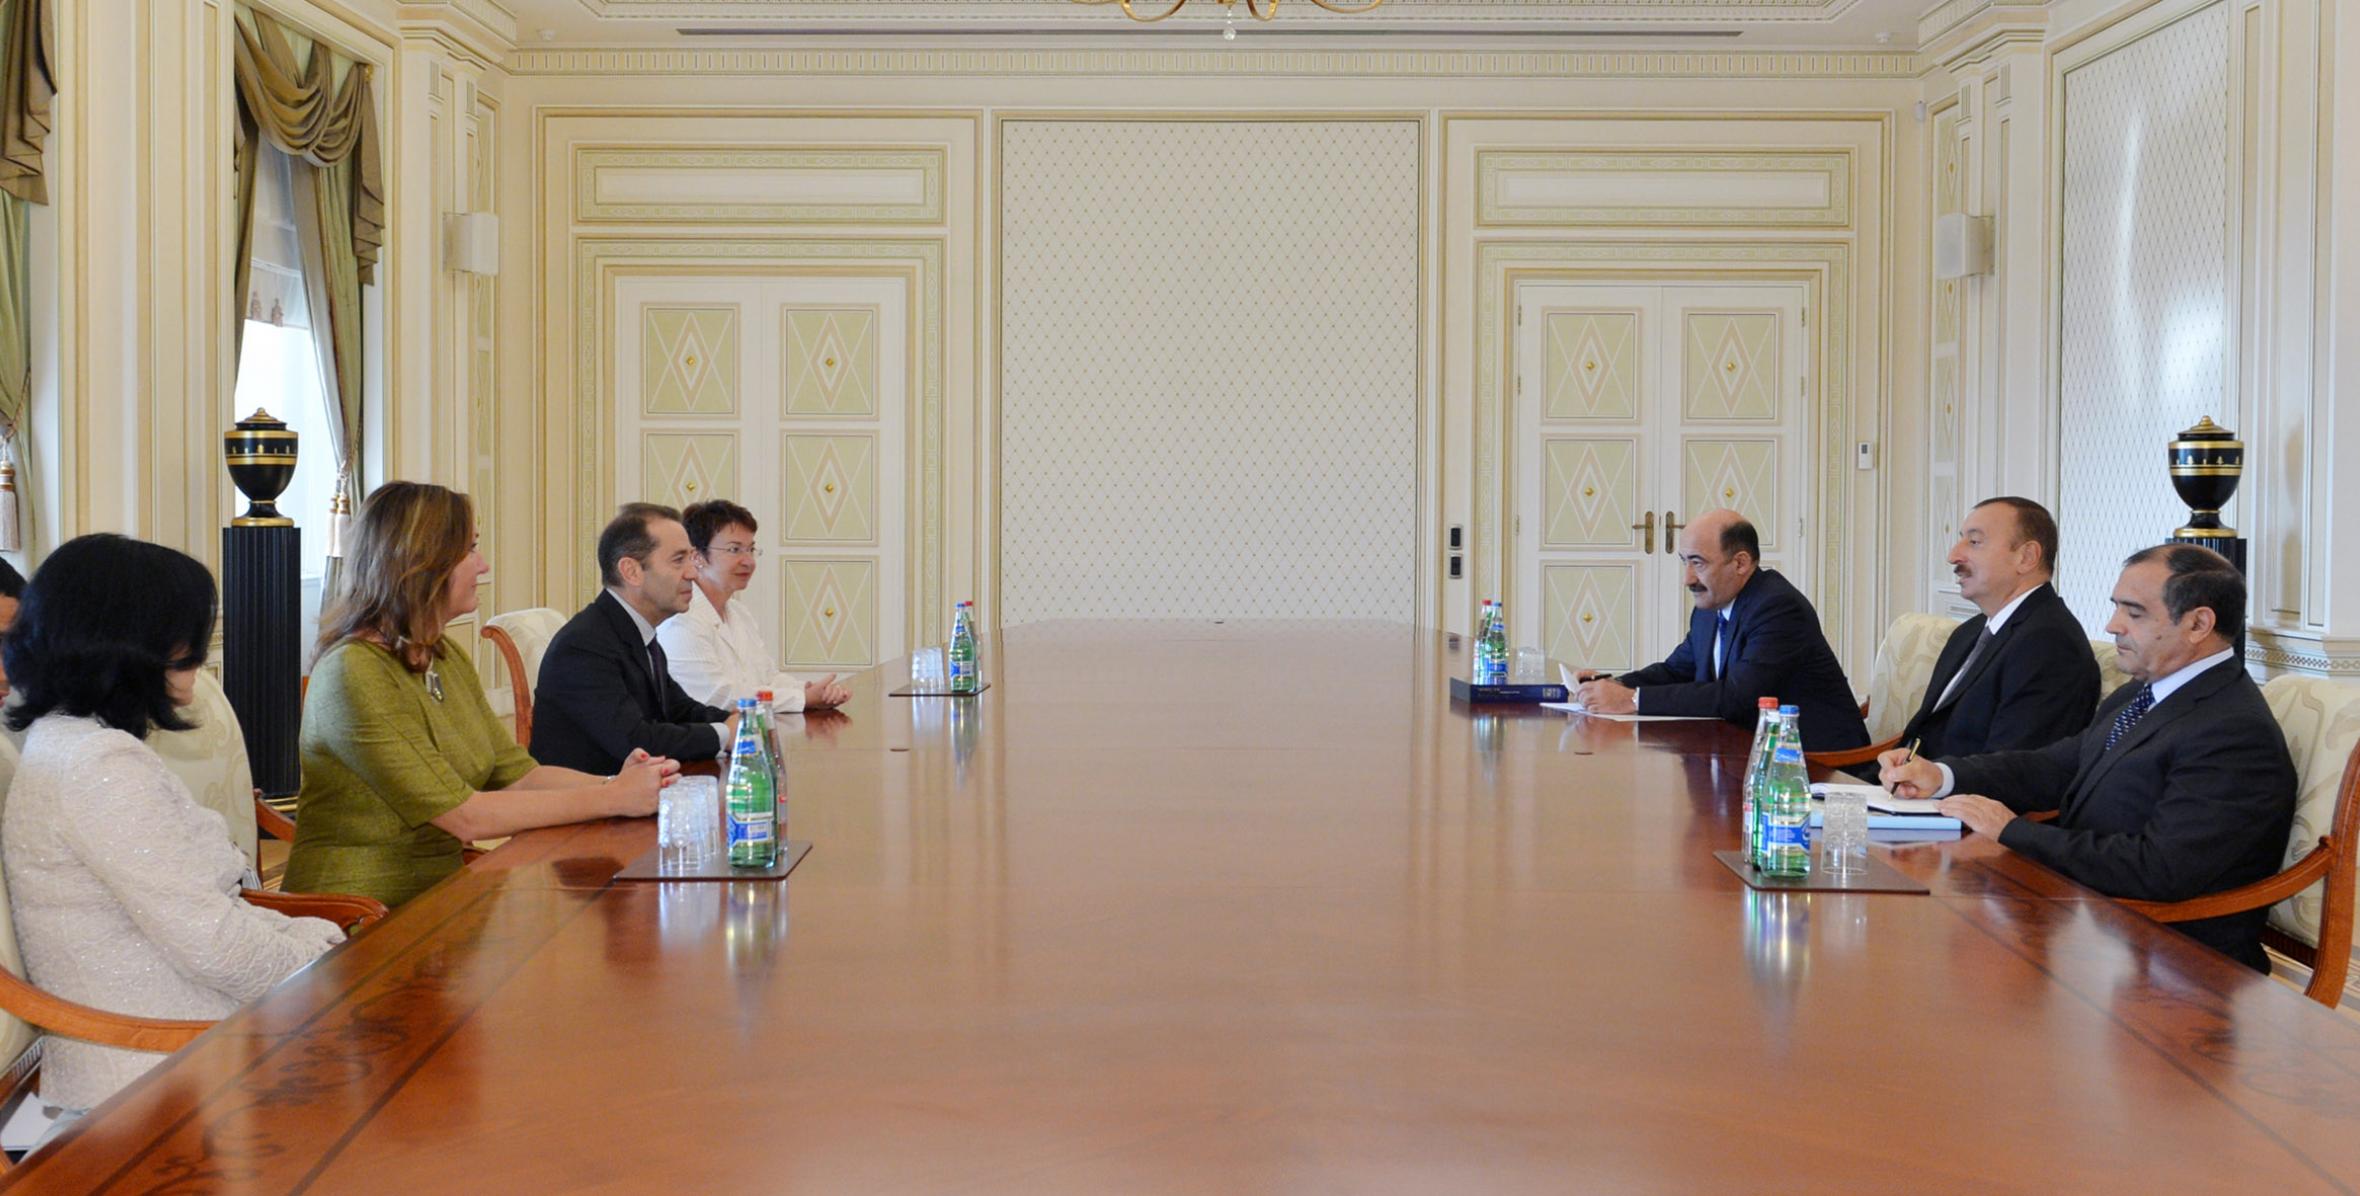 Ilham Aliyev received the President of the Conference of European National Libraries and the Vice-President of the Assembly of Eurasian Libraries